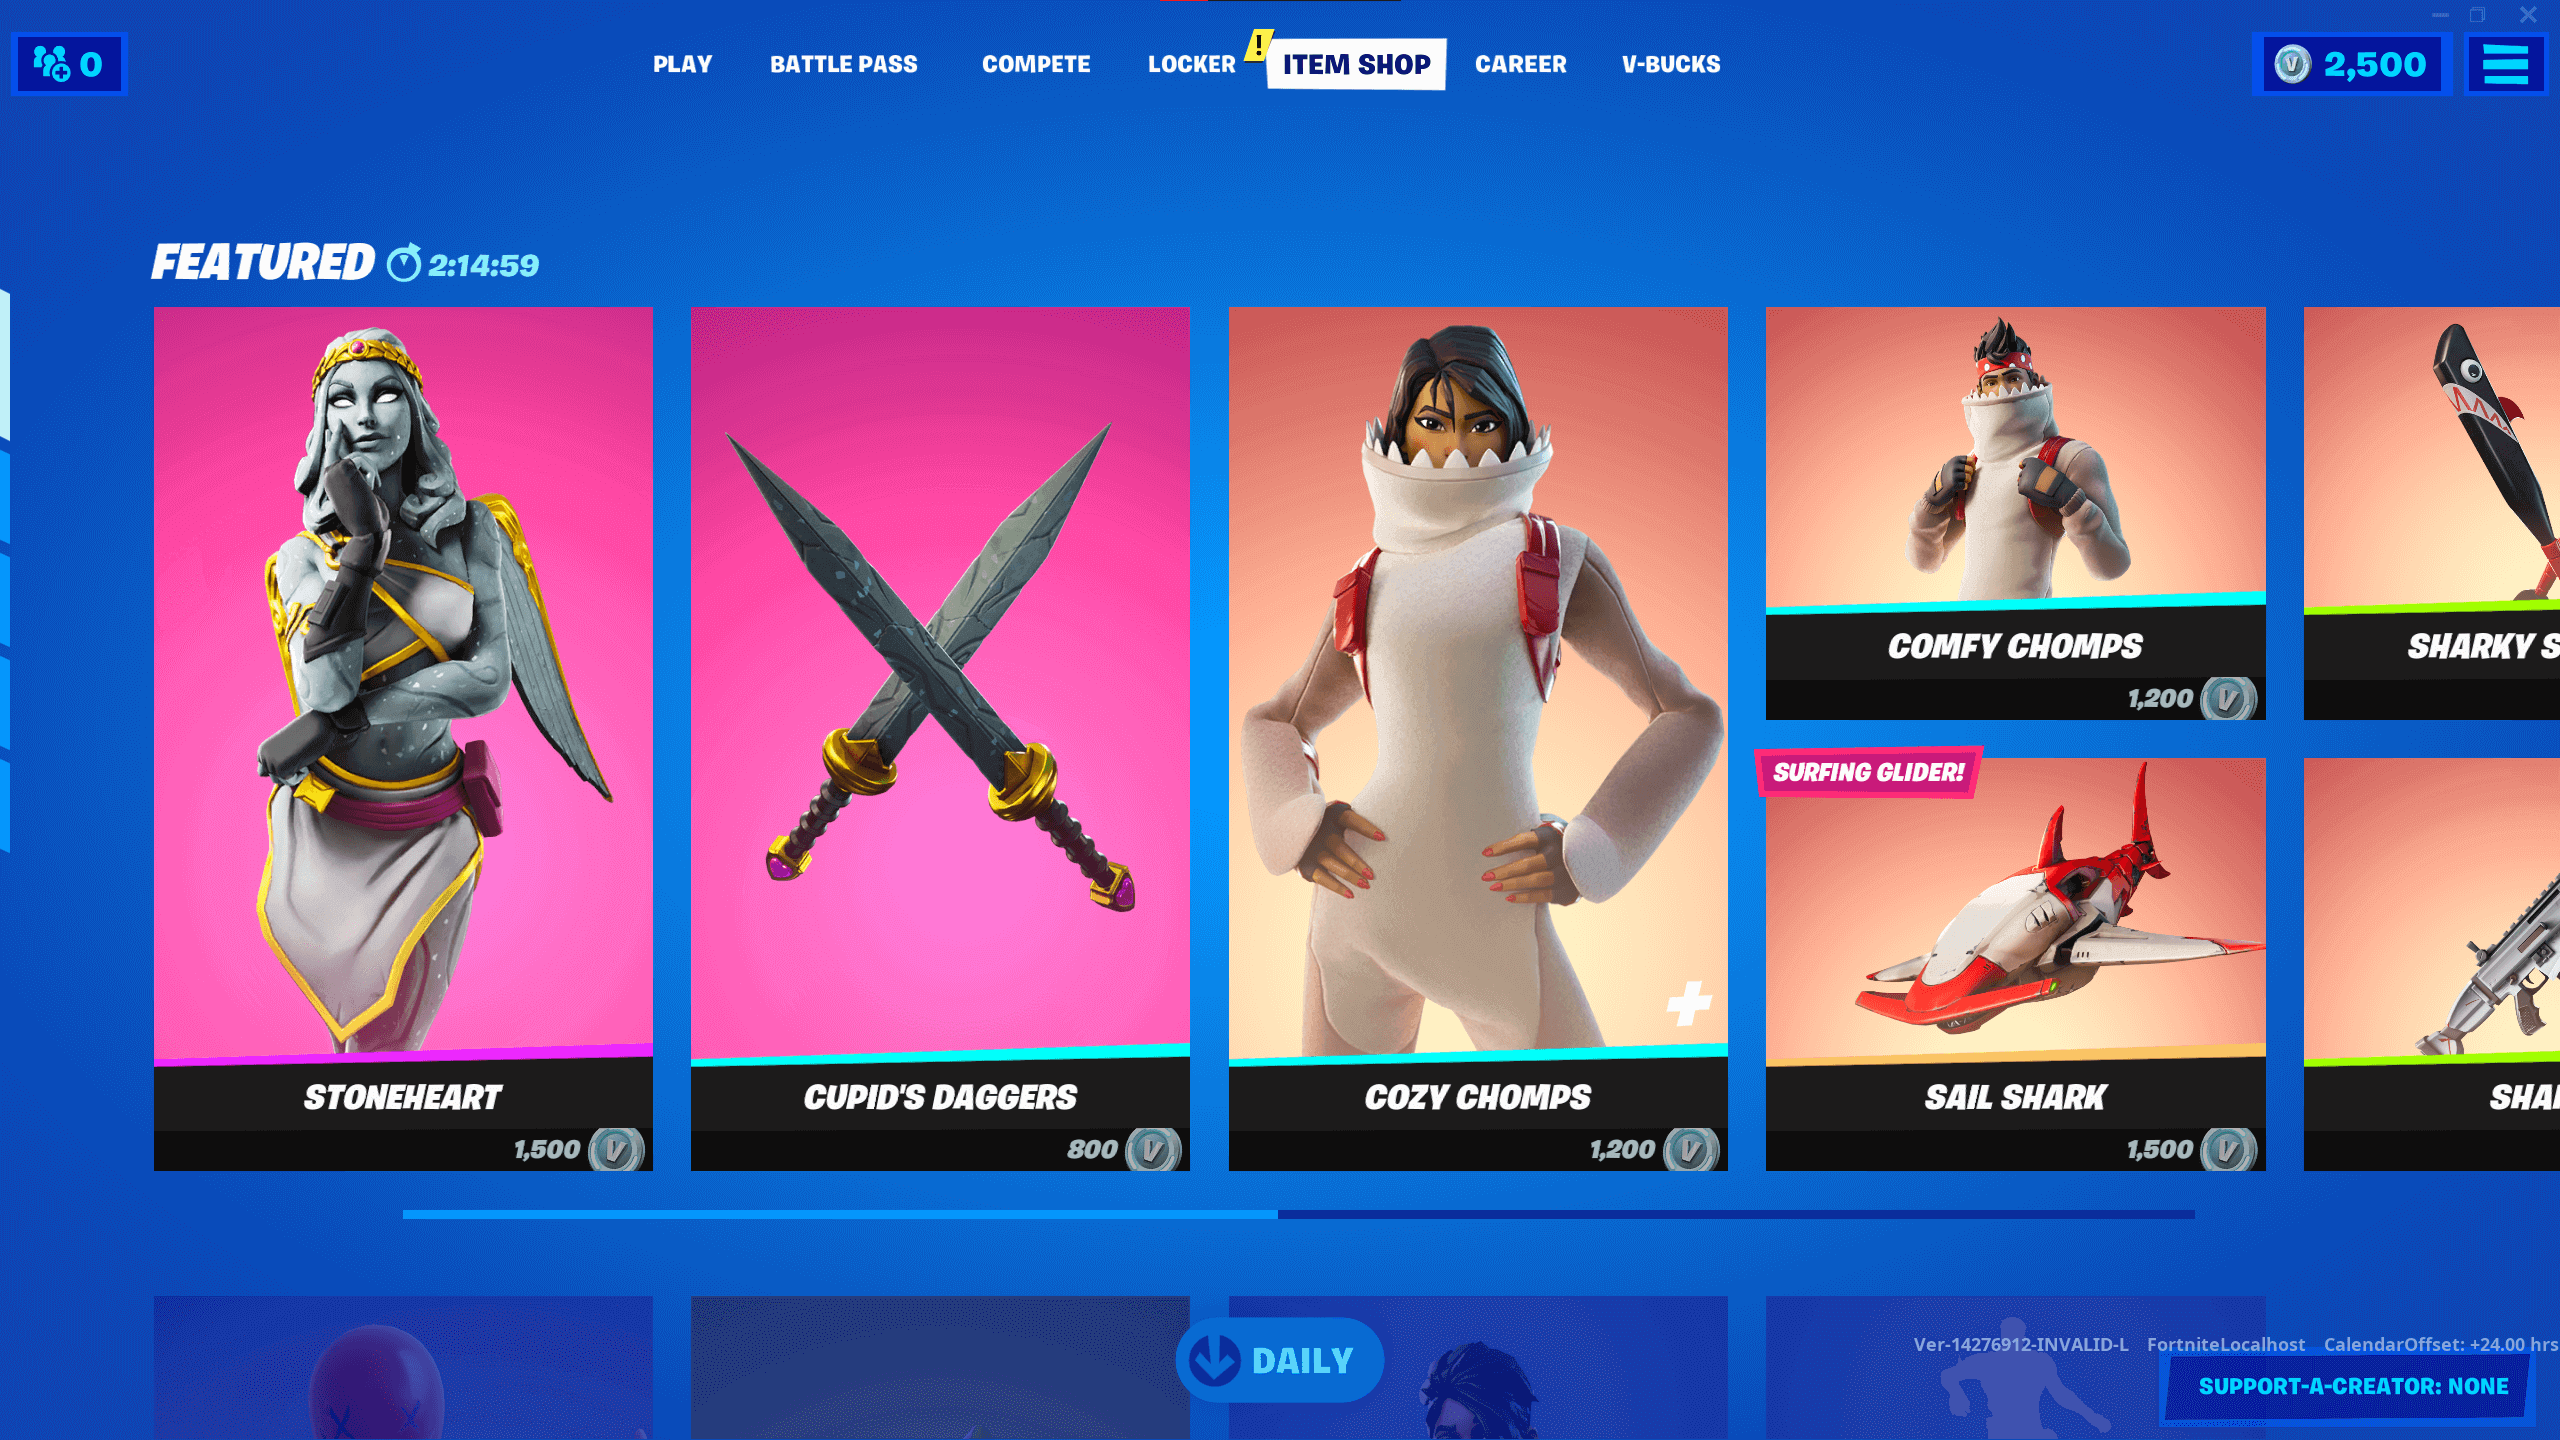 check-out-fortnite-s-new-look-item-shop